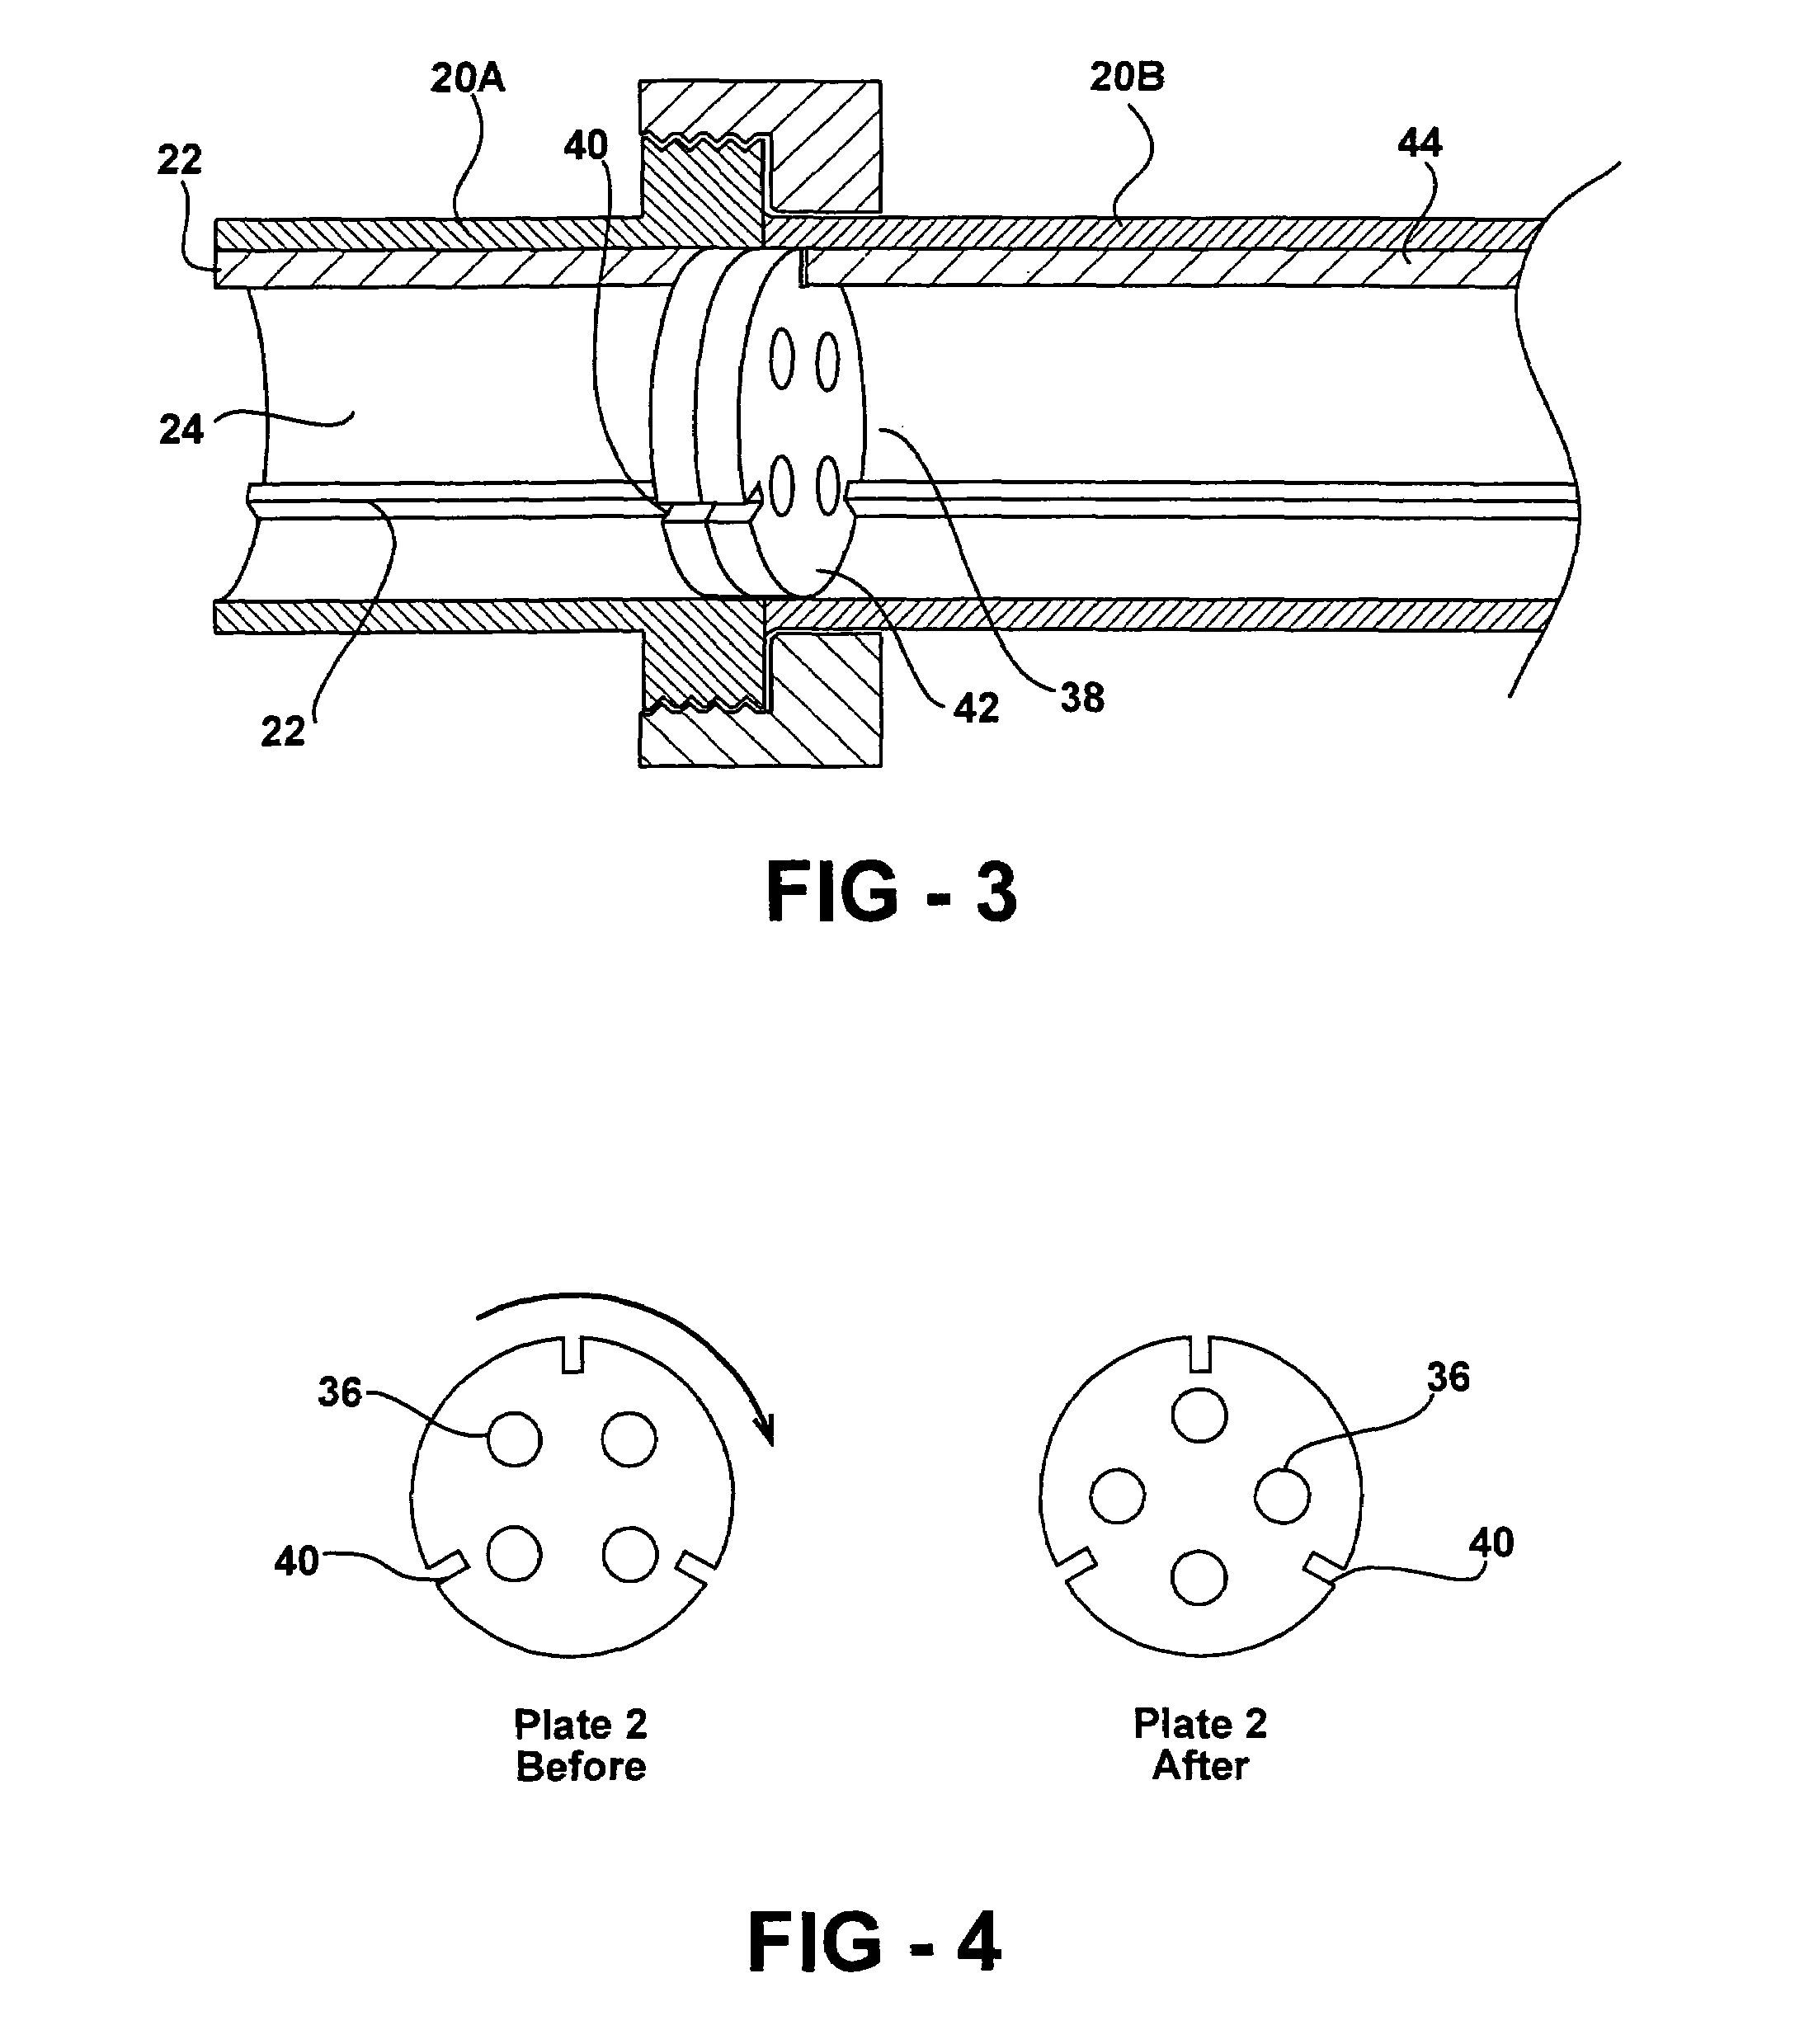 Bone cement and a system for mixing and delivery thereof